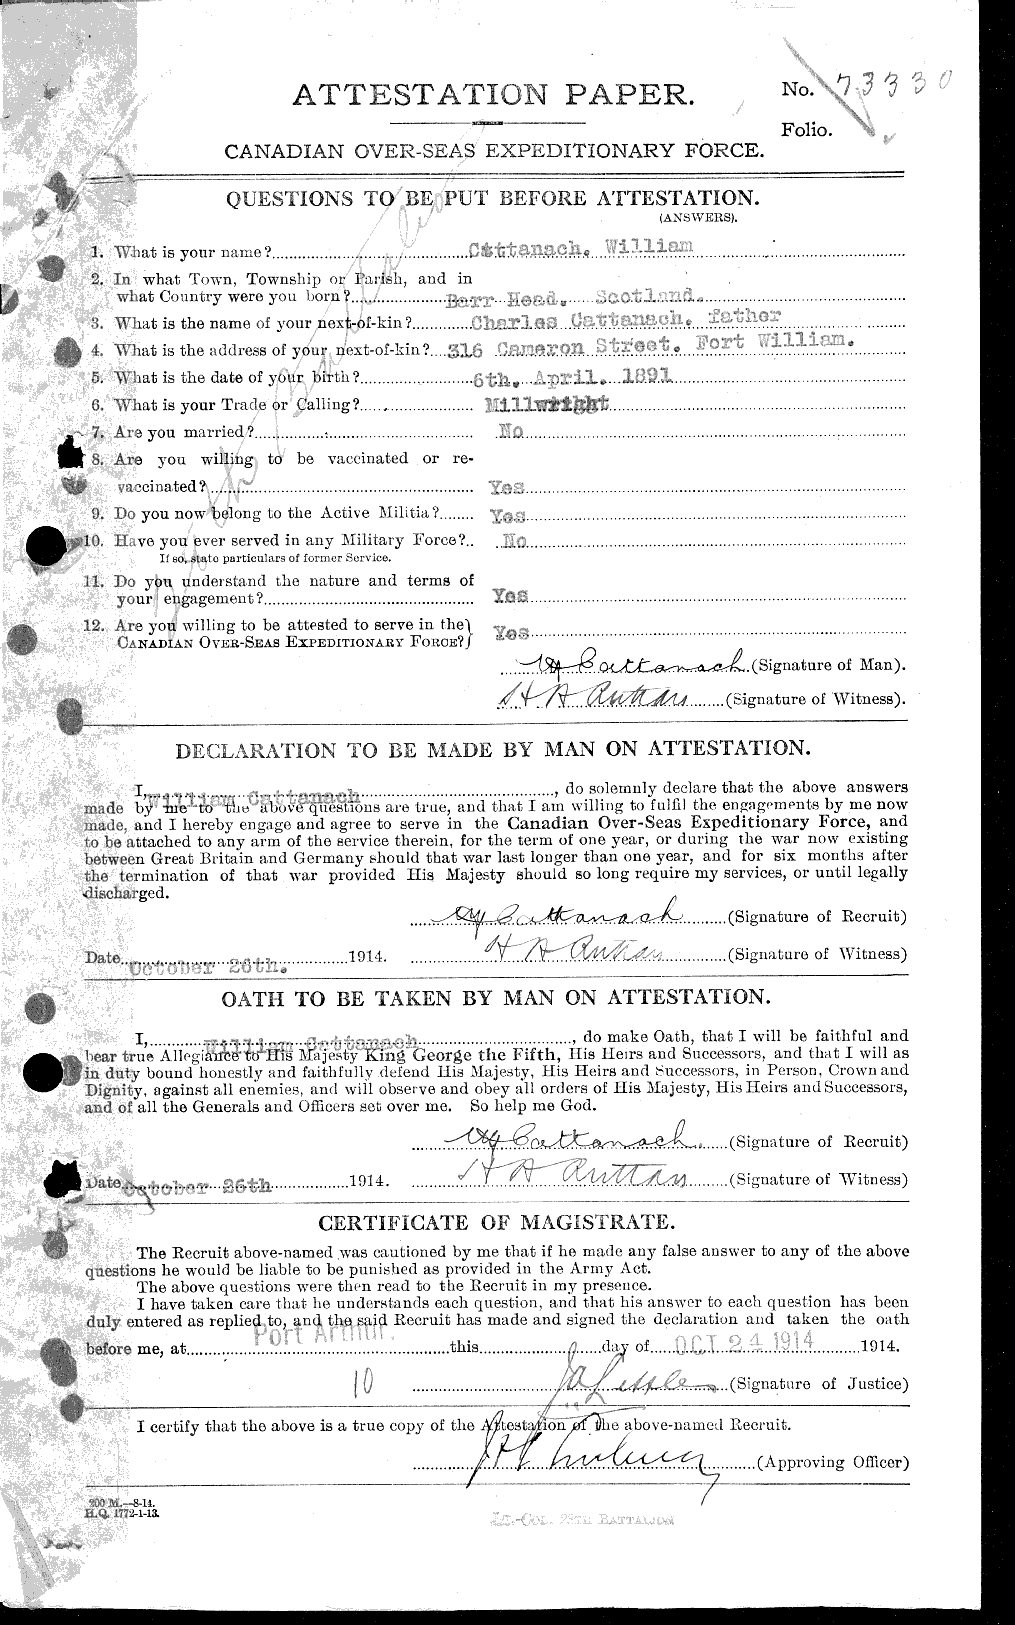 Personnel Records of the First World War - CEF 013314a